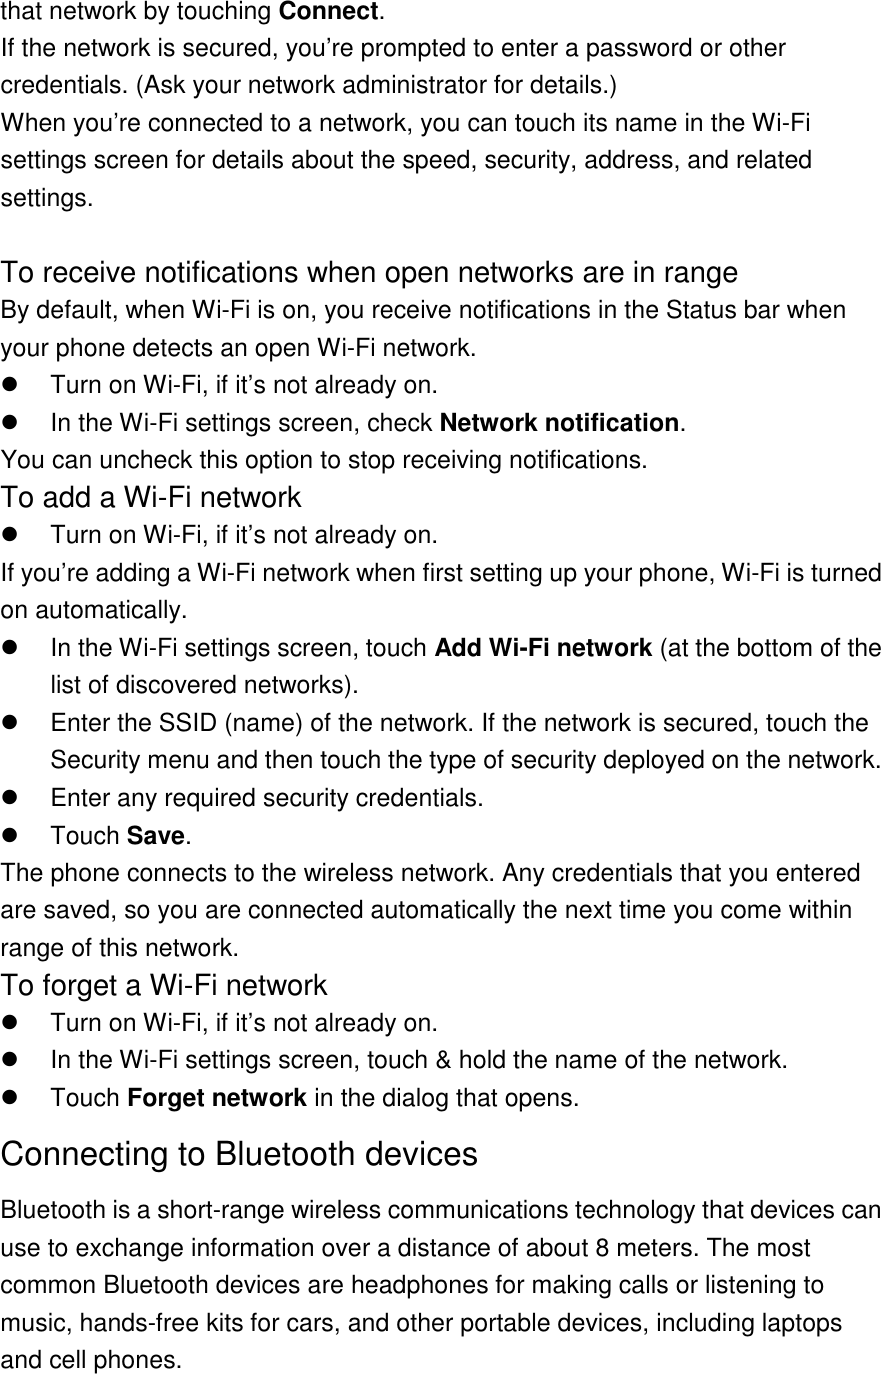 that network by touching Connect. If the network is secured, you’re prompted to enter a password or other credentials. (Ask your network administrator for details.) When you’re connected to a network, you can touch its name in the Wi-Fi settings screen for details about the speed, security, address, and related settings.  To receive notifications when open networks are in range By default, when Wi-Fi is on, you receive notifications in the Status bar when your phone detects an open Wi-Fi network.   Turn on Wi-Fi, if it’s not already on.   In the Wi-Fi settings screen, check Network notification. You can uncheck this option to stop receiving notifications. To add a Wi-Fi network   Turn on Wi-Fi, if it’s not already on. If you’re adding a Wi-Fi network when first setting up your phone, Wi-Fi is turned on automatically.   In the Wi-Fi settings screen, touch Add Wi-Fi network (at the bottom of the list of discovered networks).   Enter the SSID (name) of the network. If the network is secured, touch the Security menu and then touch the type of security deployed on the network.   Enter any required security credentials.   Touch Save. The phone connects to the wireless network. Any credentials that you entered are saved, so you are connected automatically the next time you come within range of this network. To forget a Wi-Fi network   Turn on Wi-Fi, if it’s not already on.   In the Wi-Fi settings screen, touch &amp; hold the name of the network.   Touch Forget network in the dialog that opens. Connecting to Bluetooth devices Bluetooth is a short-range wireless communications technology that devices can use to exchange information over a distance of about 8 meters. The most common Bluetooth devices are headphones for making calls or listening to music, hands-free kits for cars, and other portable devices, including laptops and cell phones.  